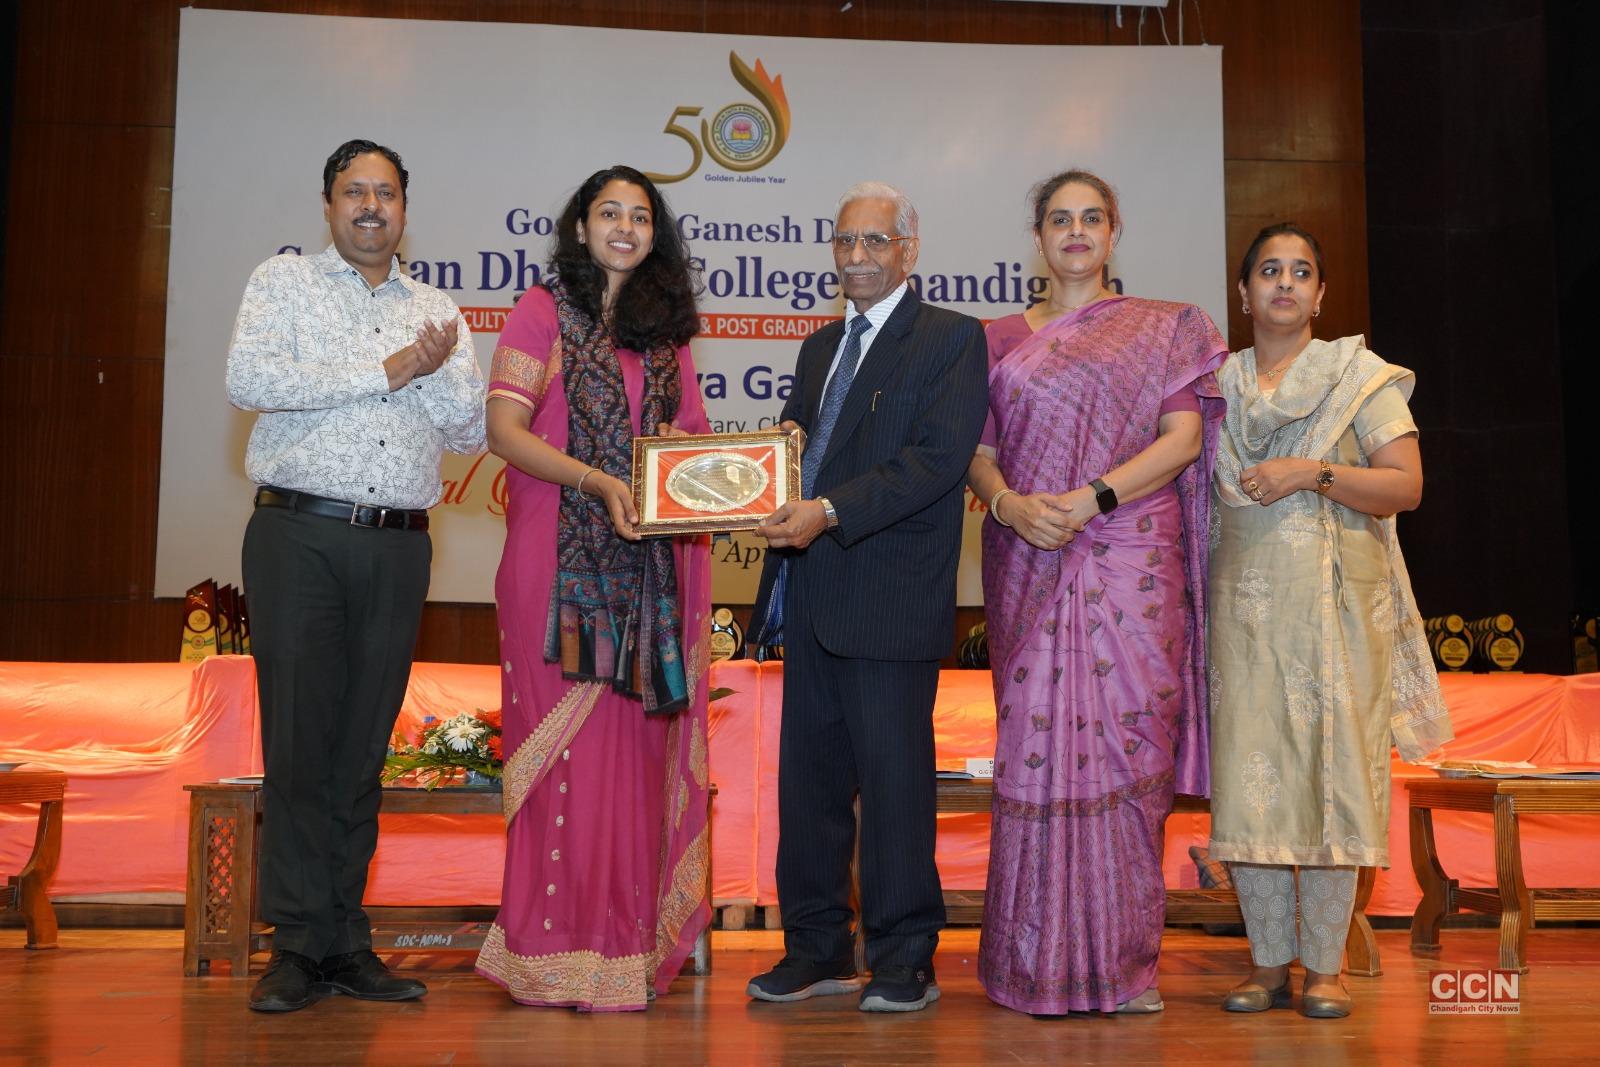 GGDSD College holds annual Prize distribution Function 1050 students & 7 faculty members were felicitated